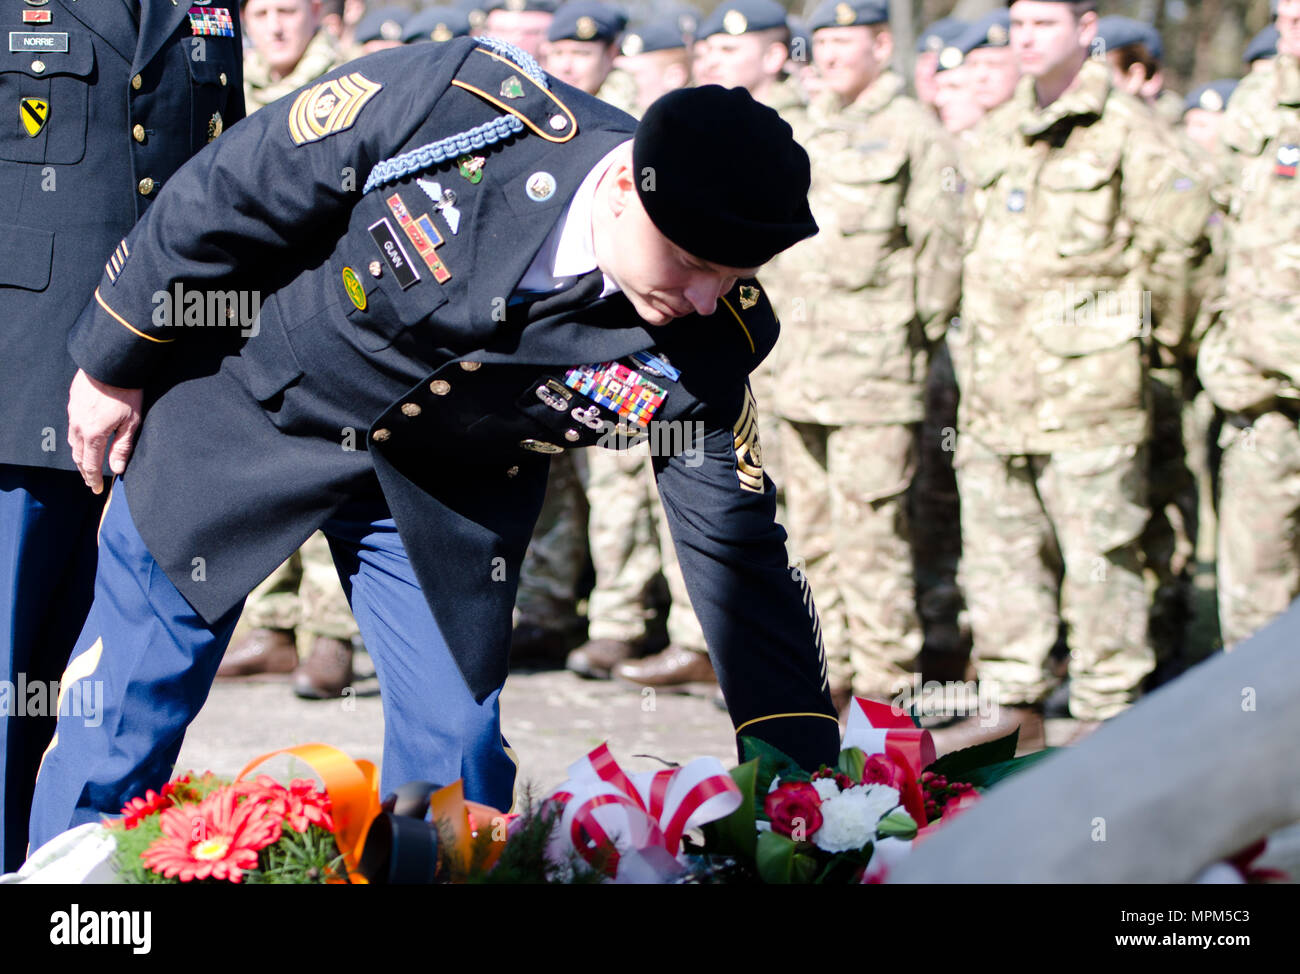 Command Sgt. Maj. Christopher D. Gunn from 3rd ABCT, 4th ID, lays a wreath in honor of those who were held as POWs at camp Stalag Luft III during a commemoration ceremony March 24, 2017 at Zagan, Poland.  Members of 3rd ABCT, 4th ID participated in the two-day event to strengthen their relationships with their Polish Allies while participating in Operation Atlantic Resolve. (U.S. Army photo by Capt. John W. Strickland, 7th Mobile Public Affairs Detachment) Stock Photo